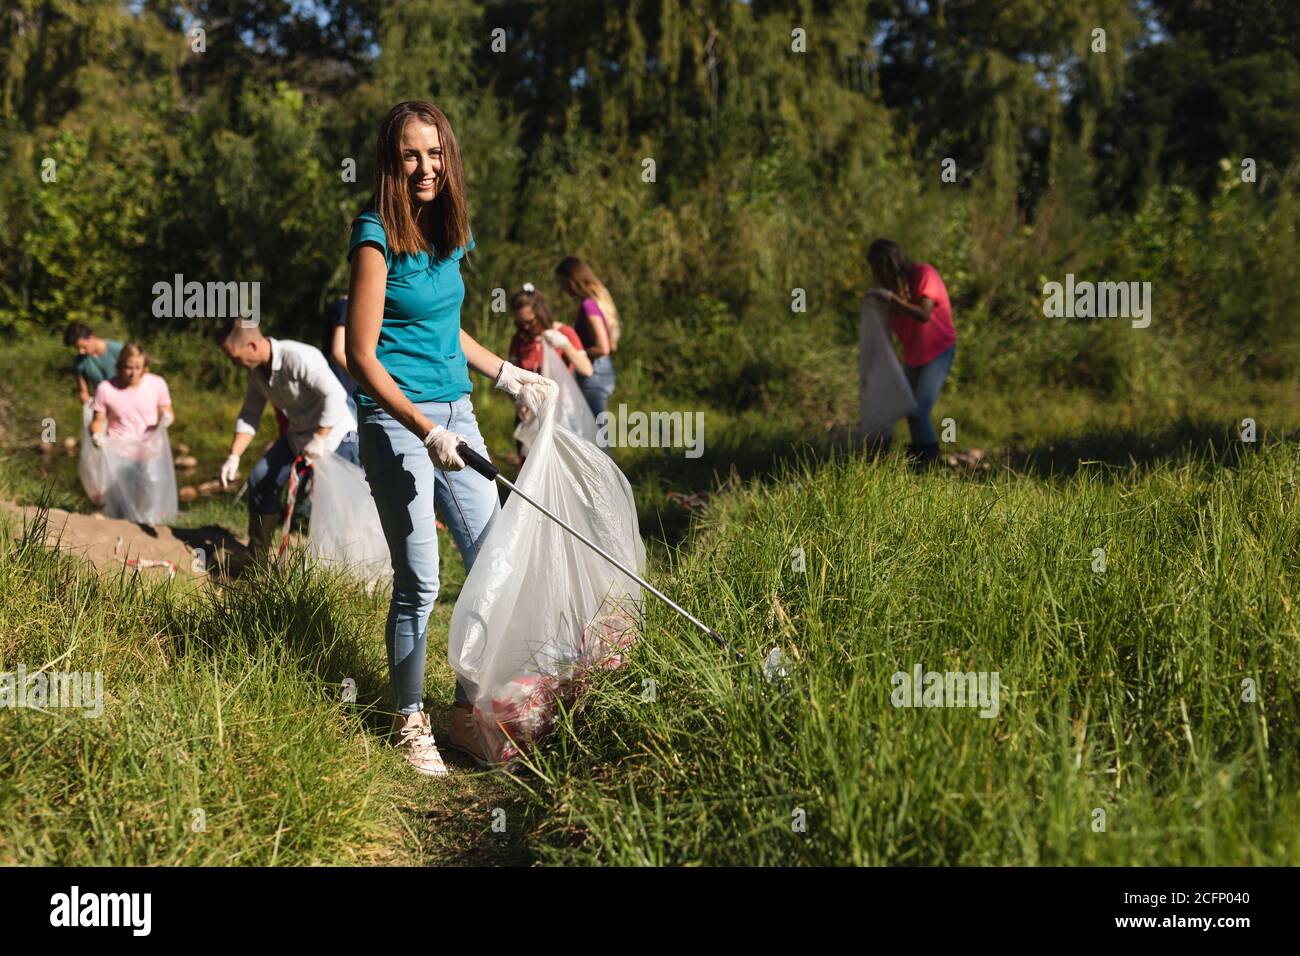 Picking up rubbish in the background Stock Photo